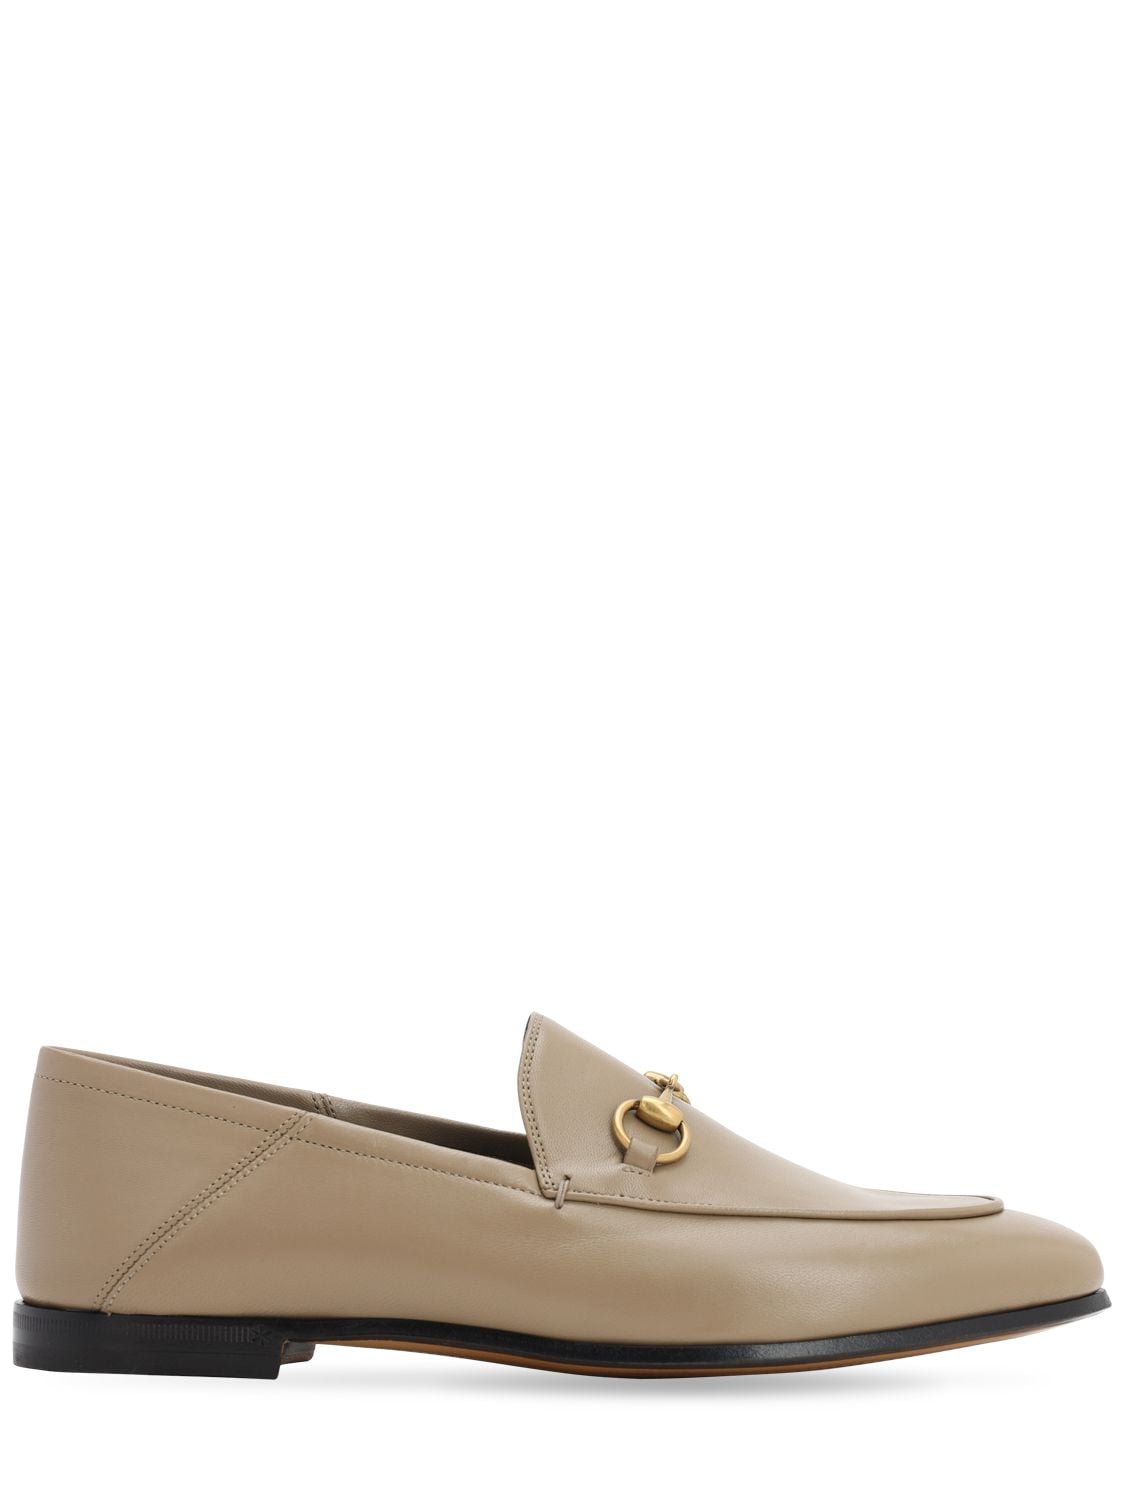 Gucci 10mm Brixton Leather Loafers In Taupe